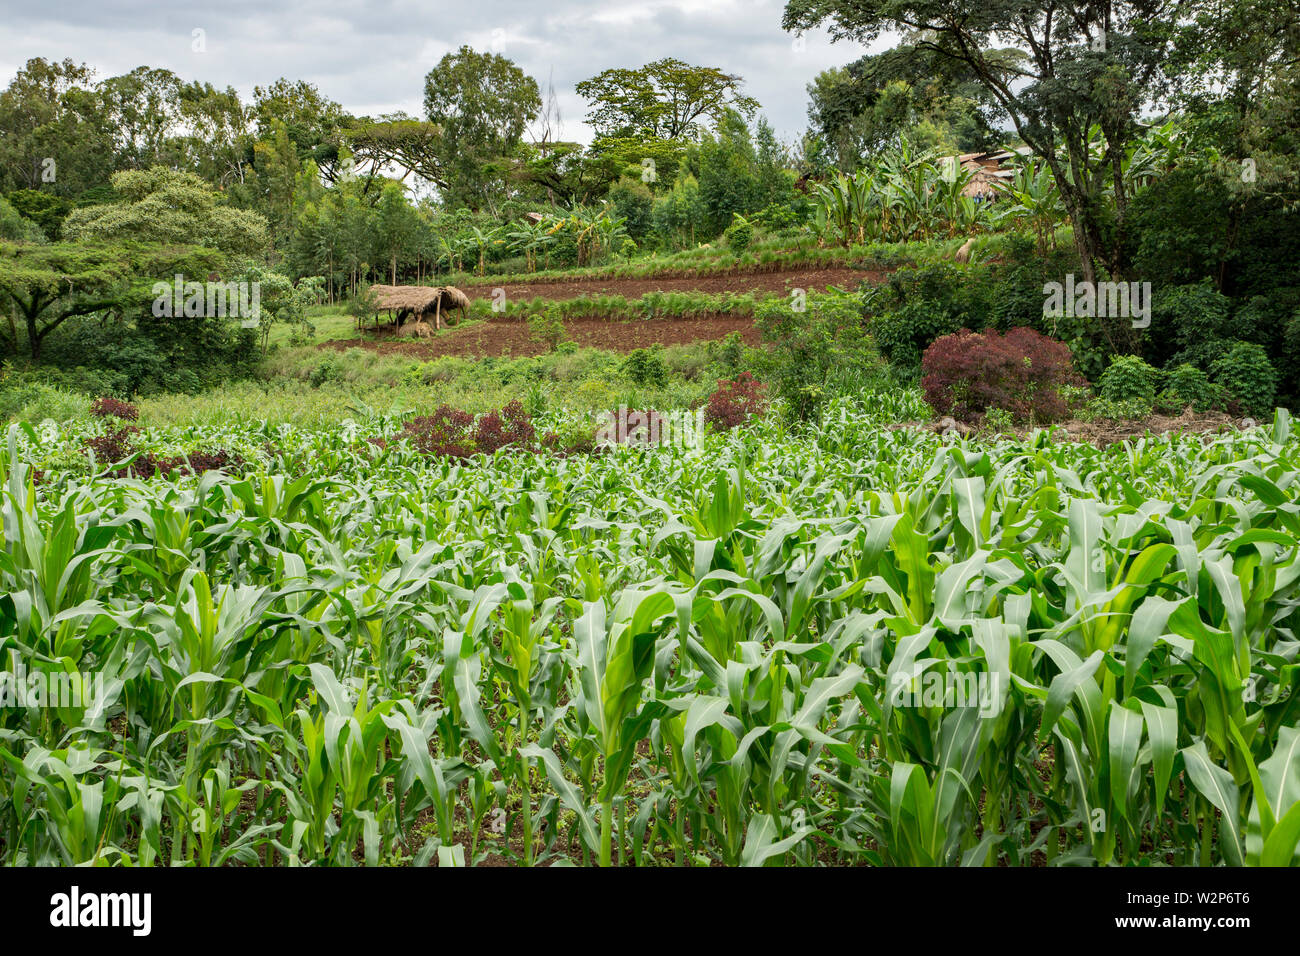 Wetland cultivation with maize (Zea mays) in Illubabor, Ethiopia Stock Photo